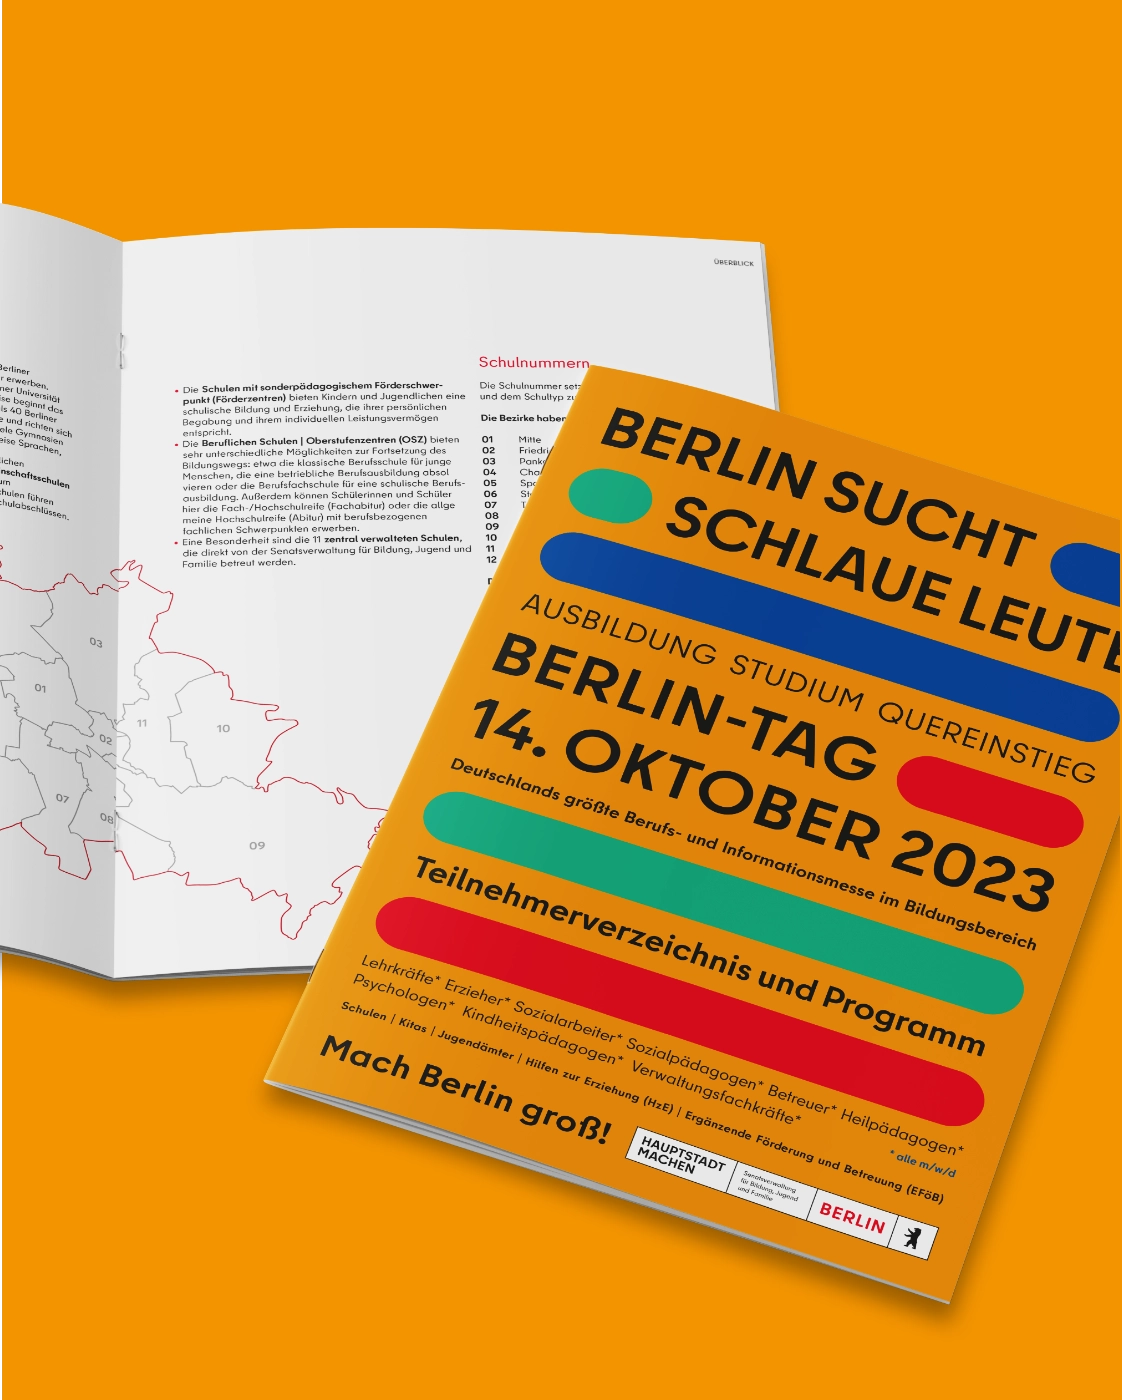 A picture shows the exhibition booklet of Berlin Day 2023. Berlin Day is Germany's largest careers and information fair in the education sector